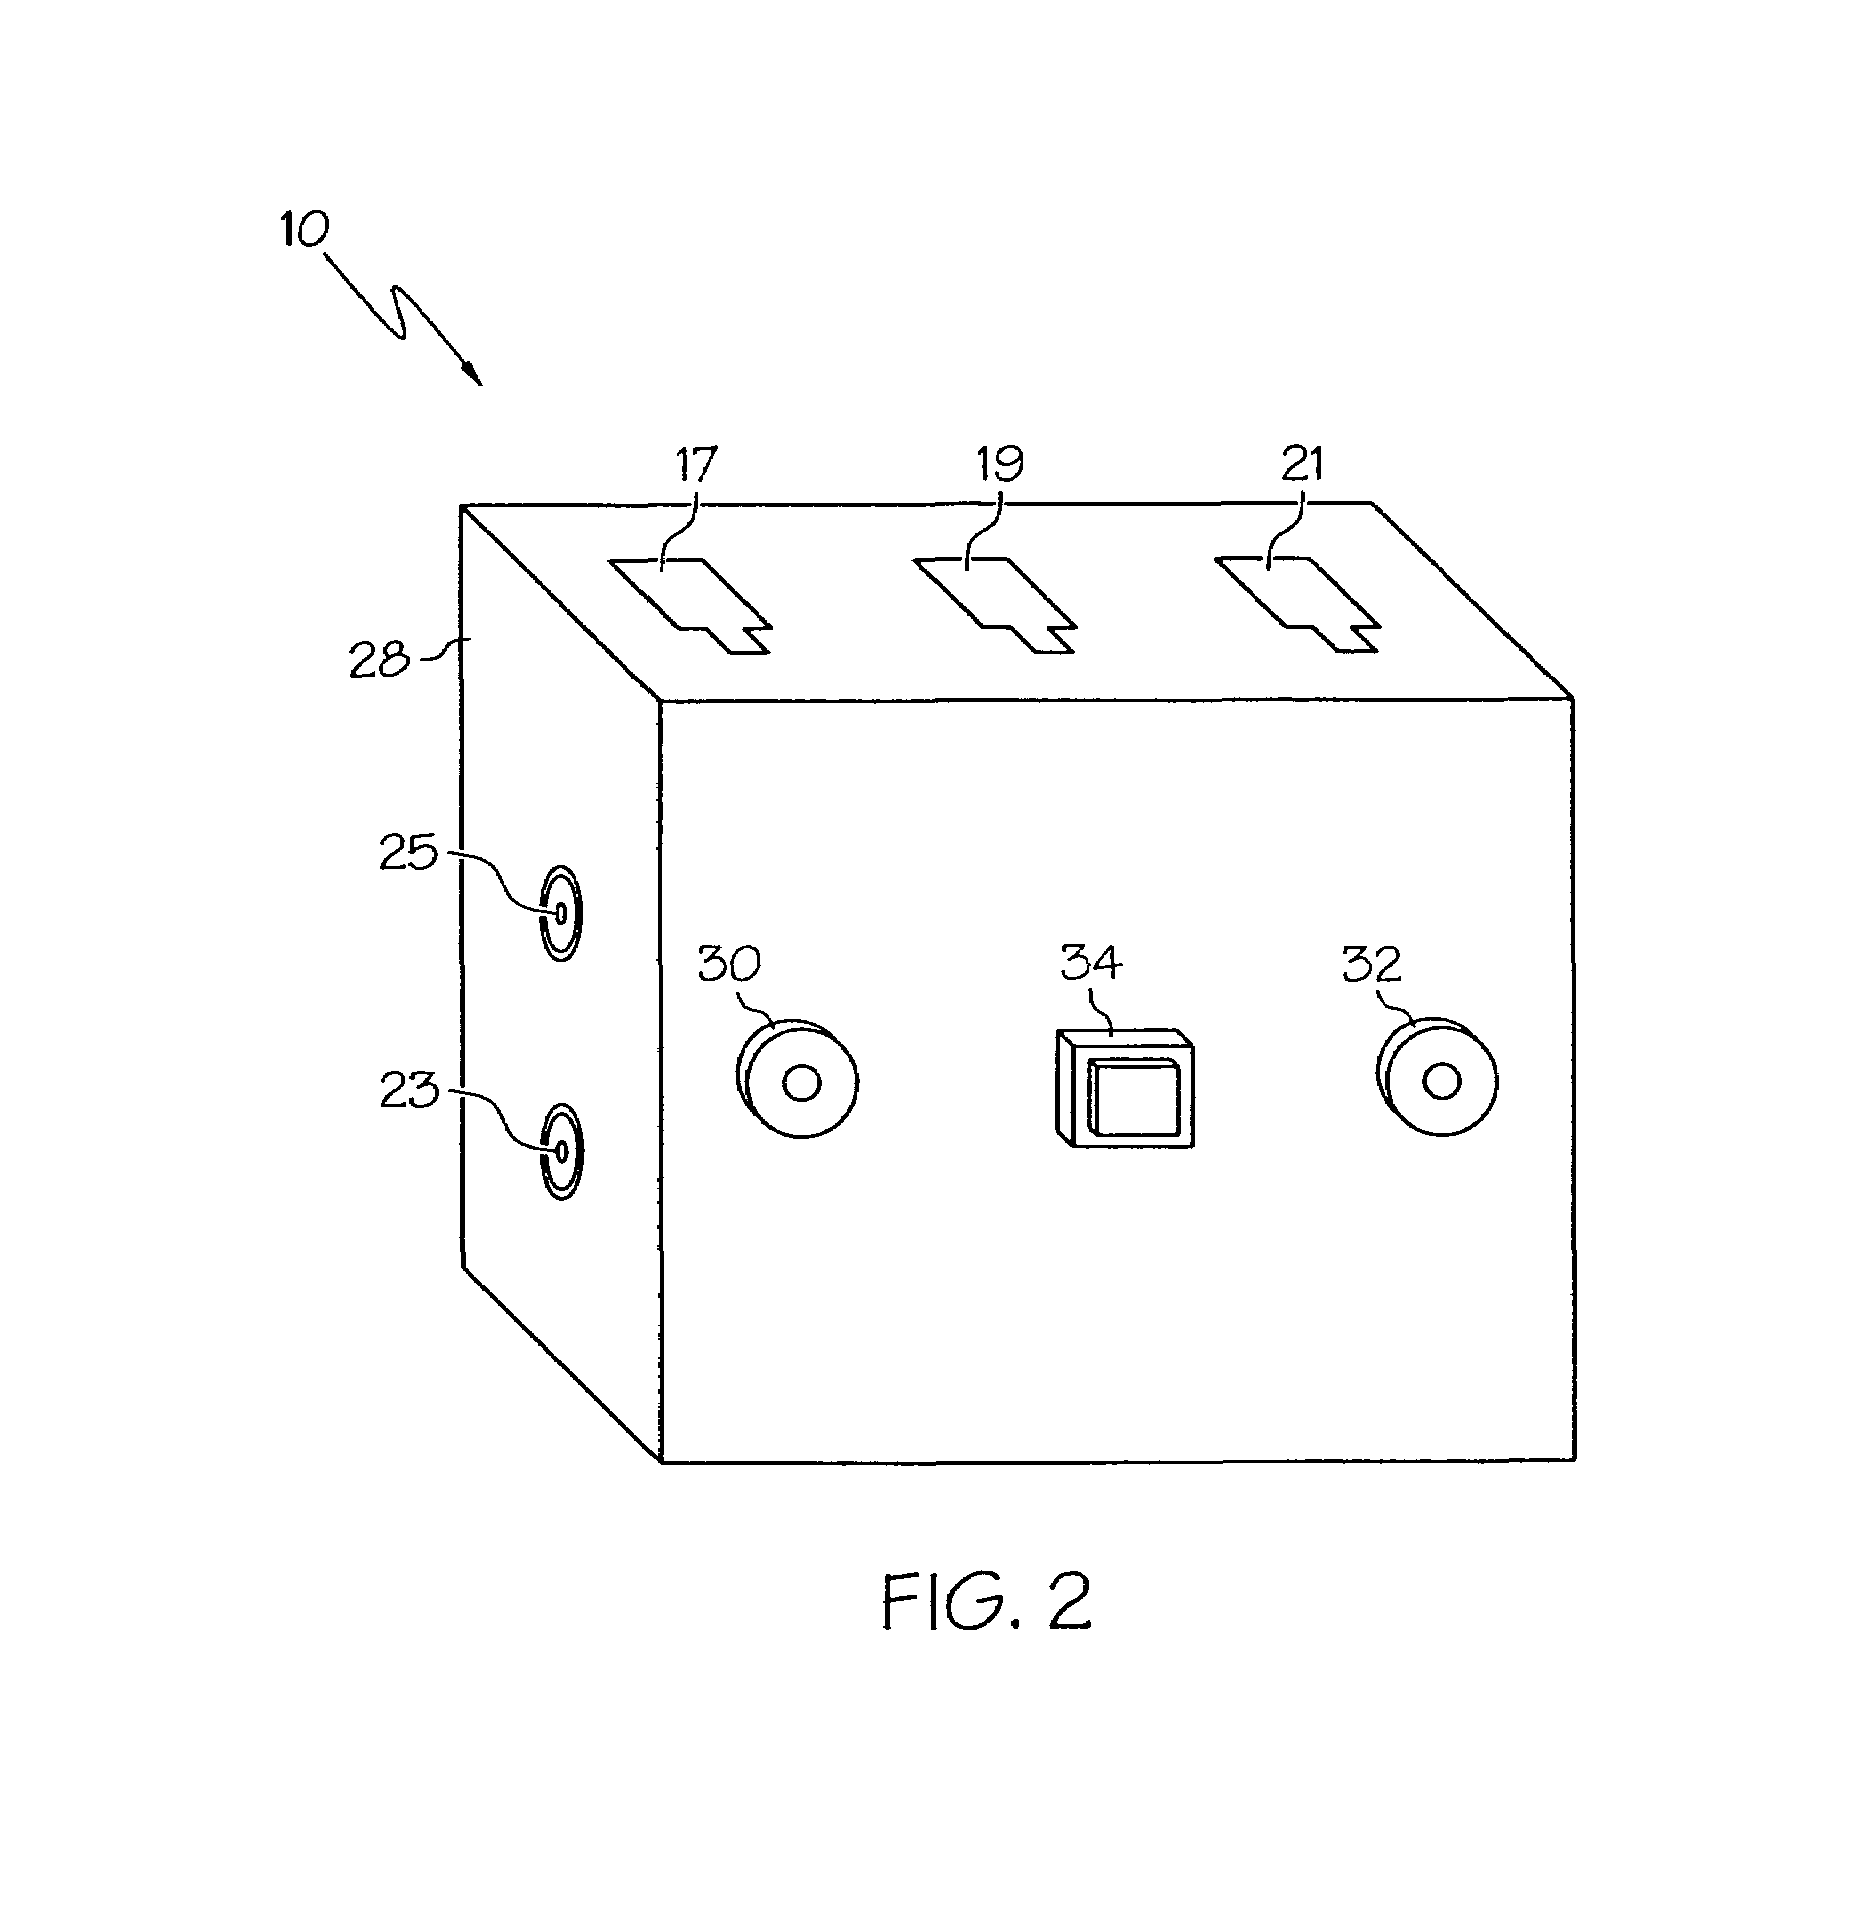 Elevator communication devices, systems and methods